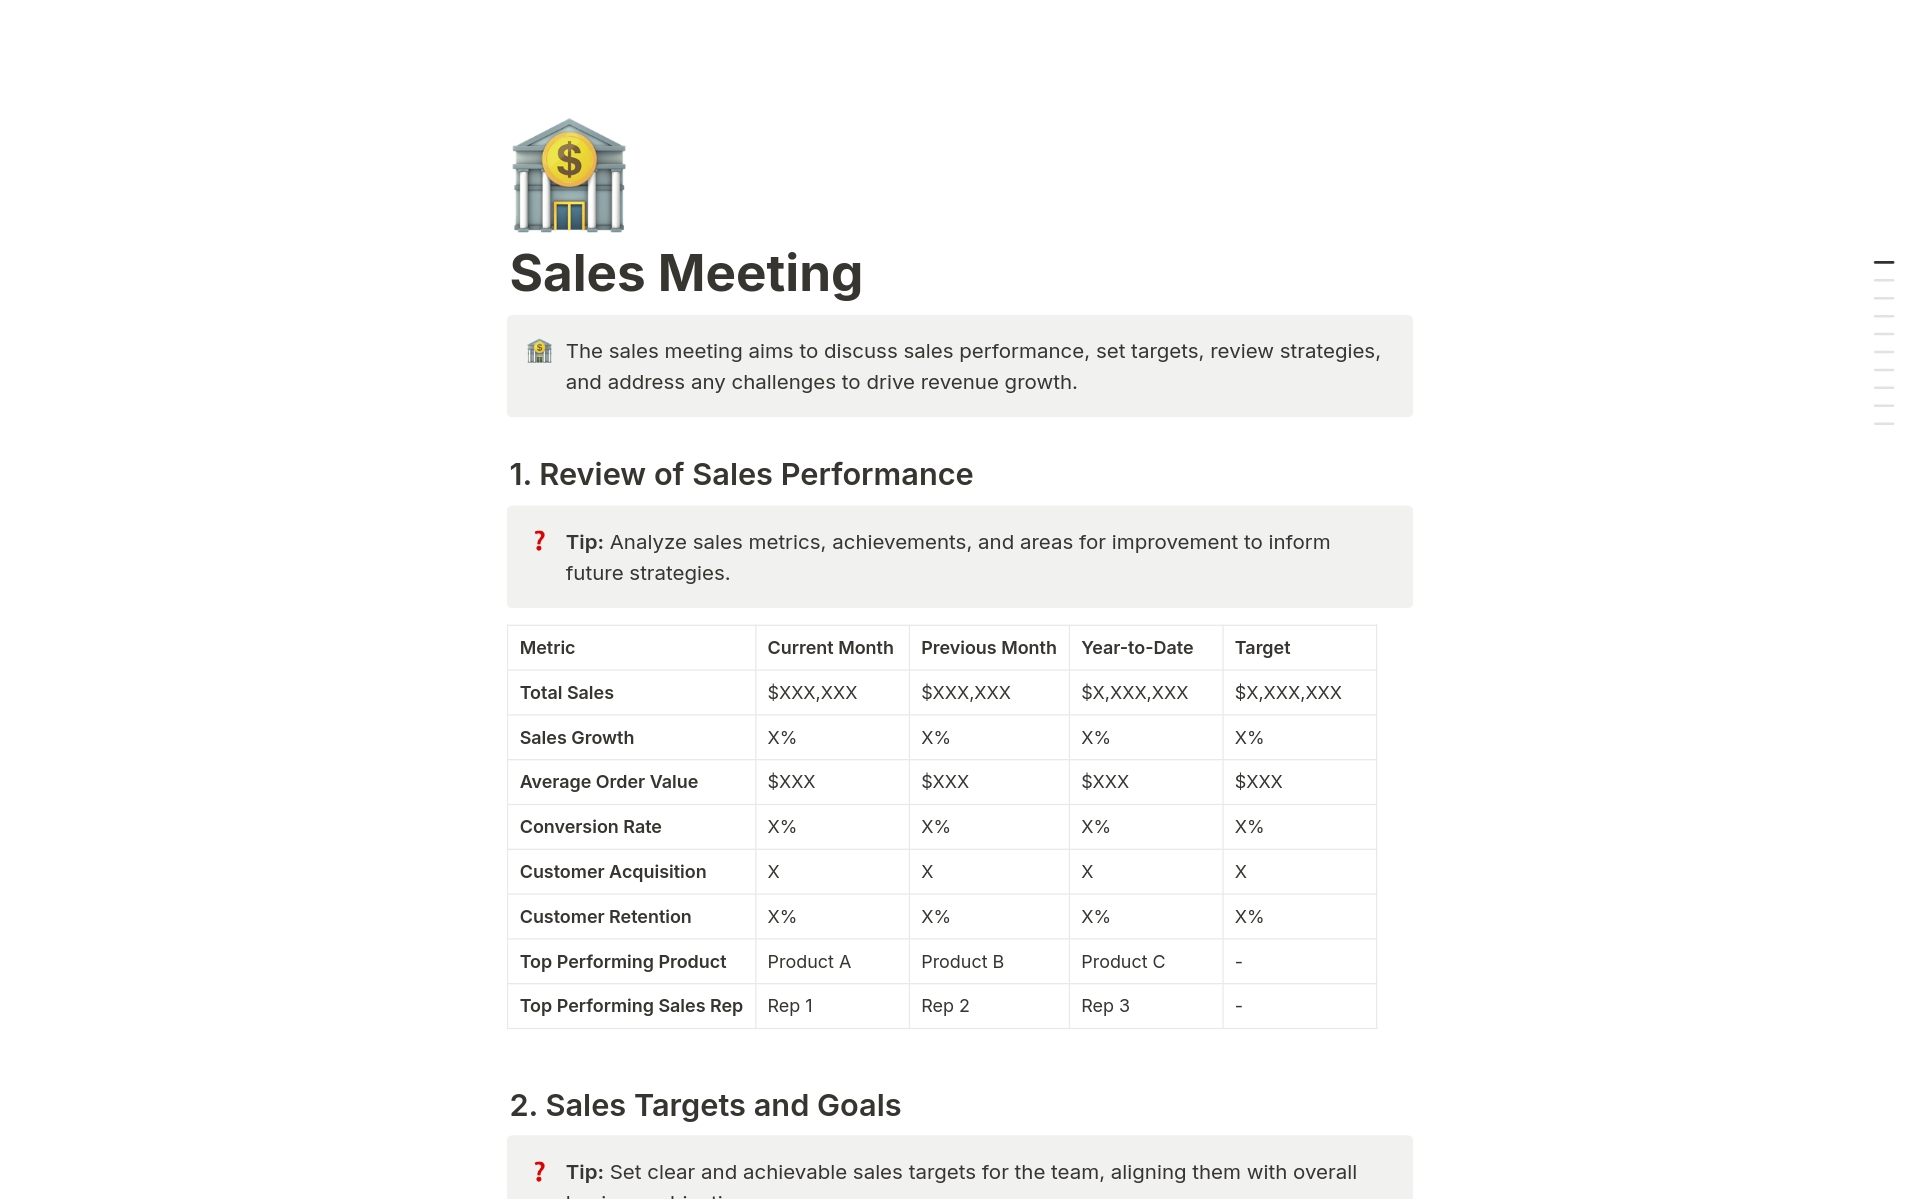 The sales meeting aims to discuss sales performance, set targets, review strategies, and address any challenges to drive revenue growth.